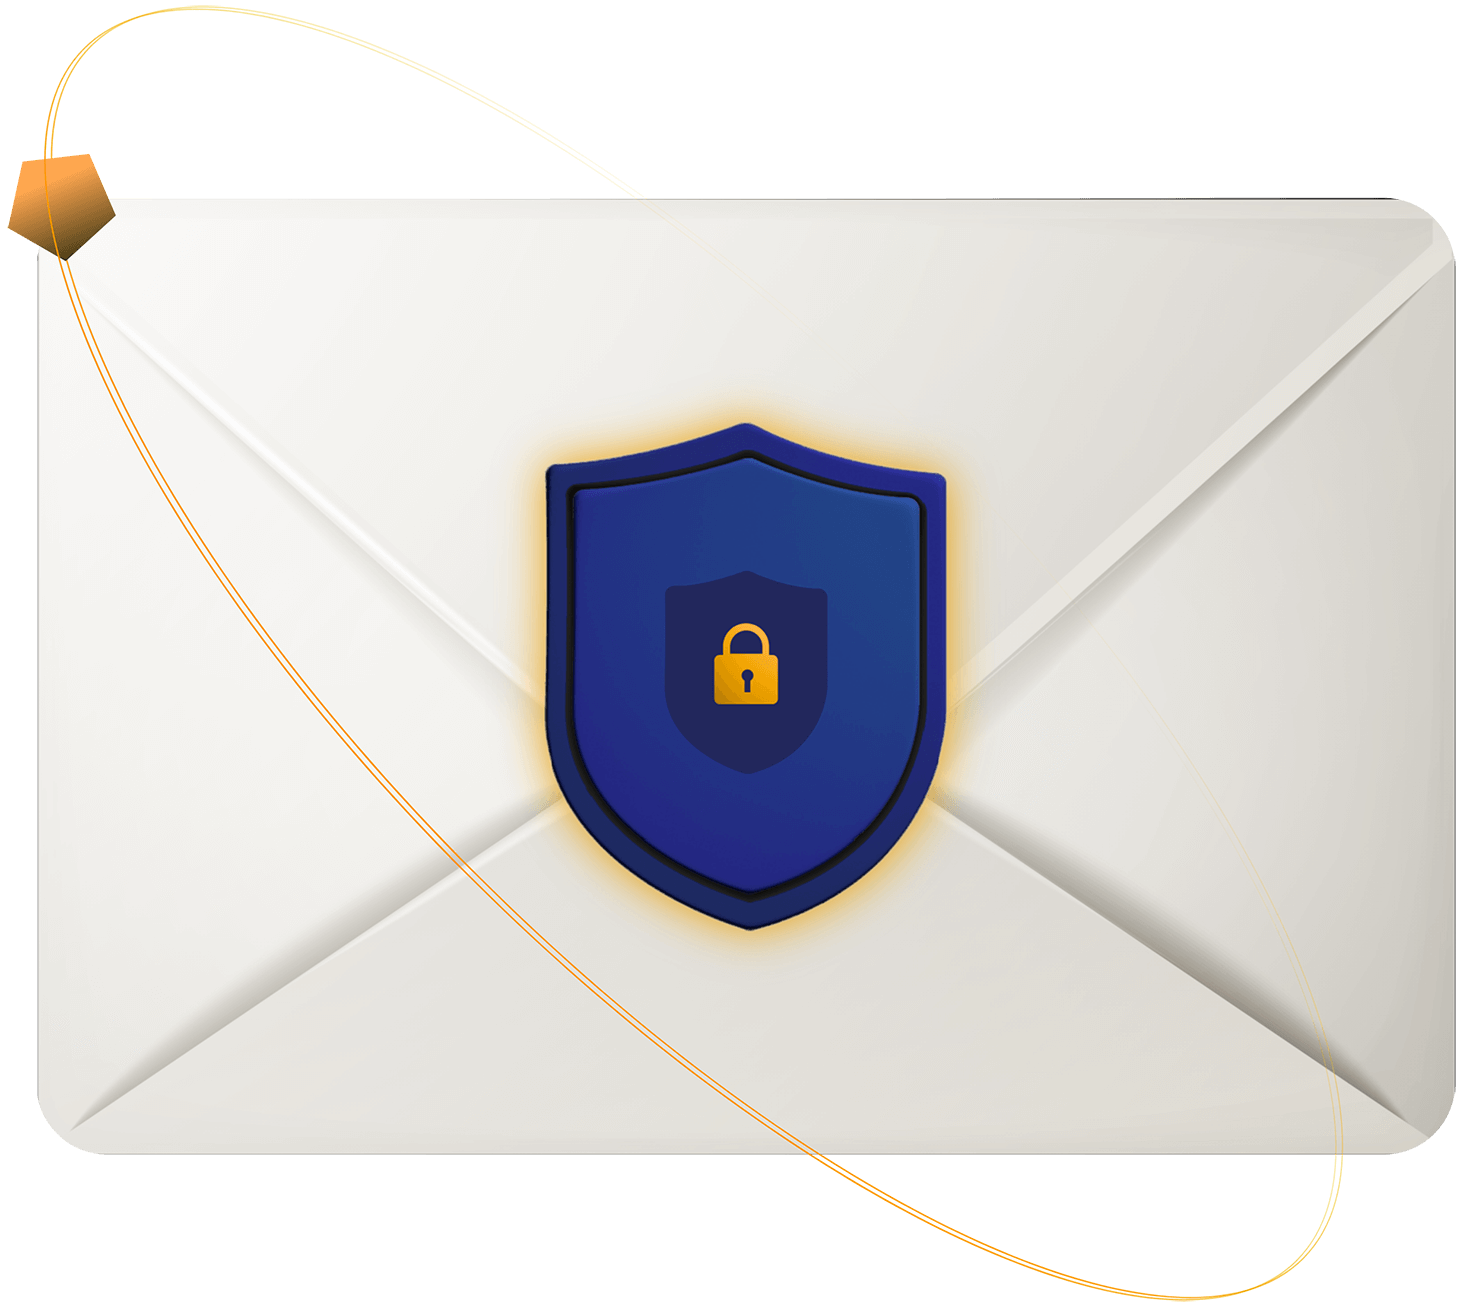 Email Security, Archival & eDiscovery for your business communications